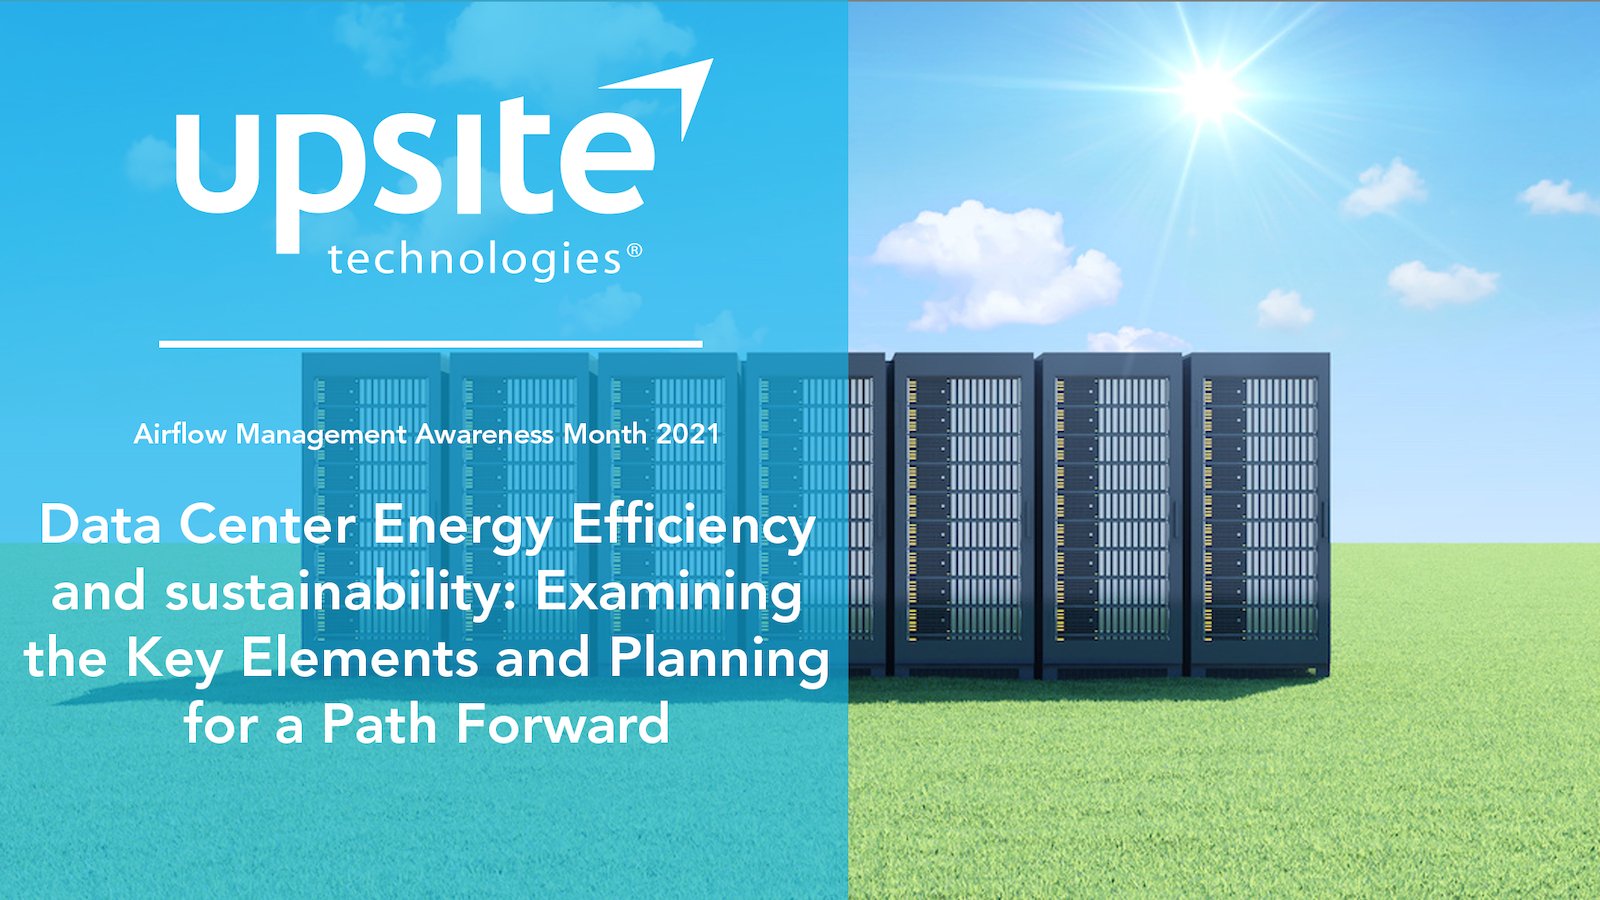 webinar-data-center-energy-efficiency-and-sustainability-examining-the-key-elements-and-planning-for-a-path-forward-thumb-final